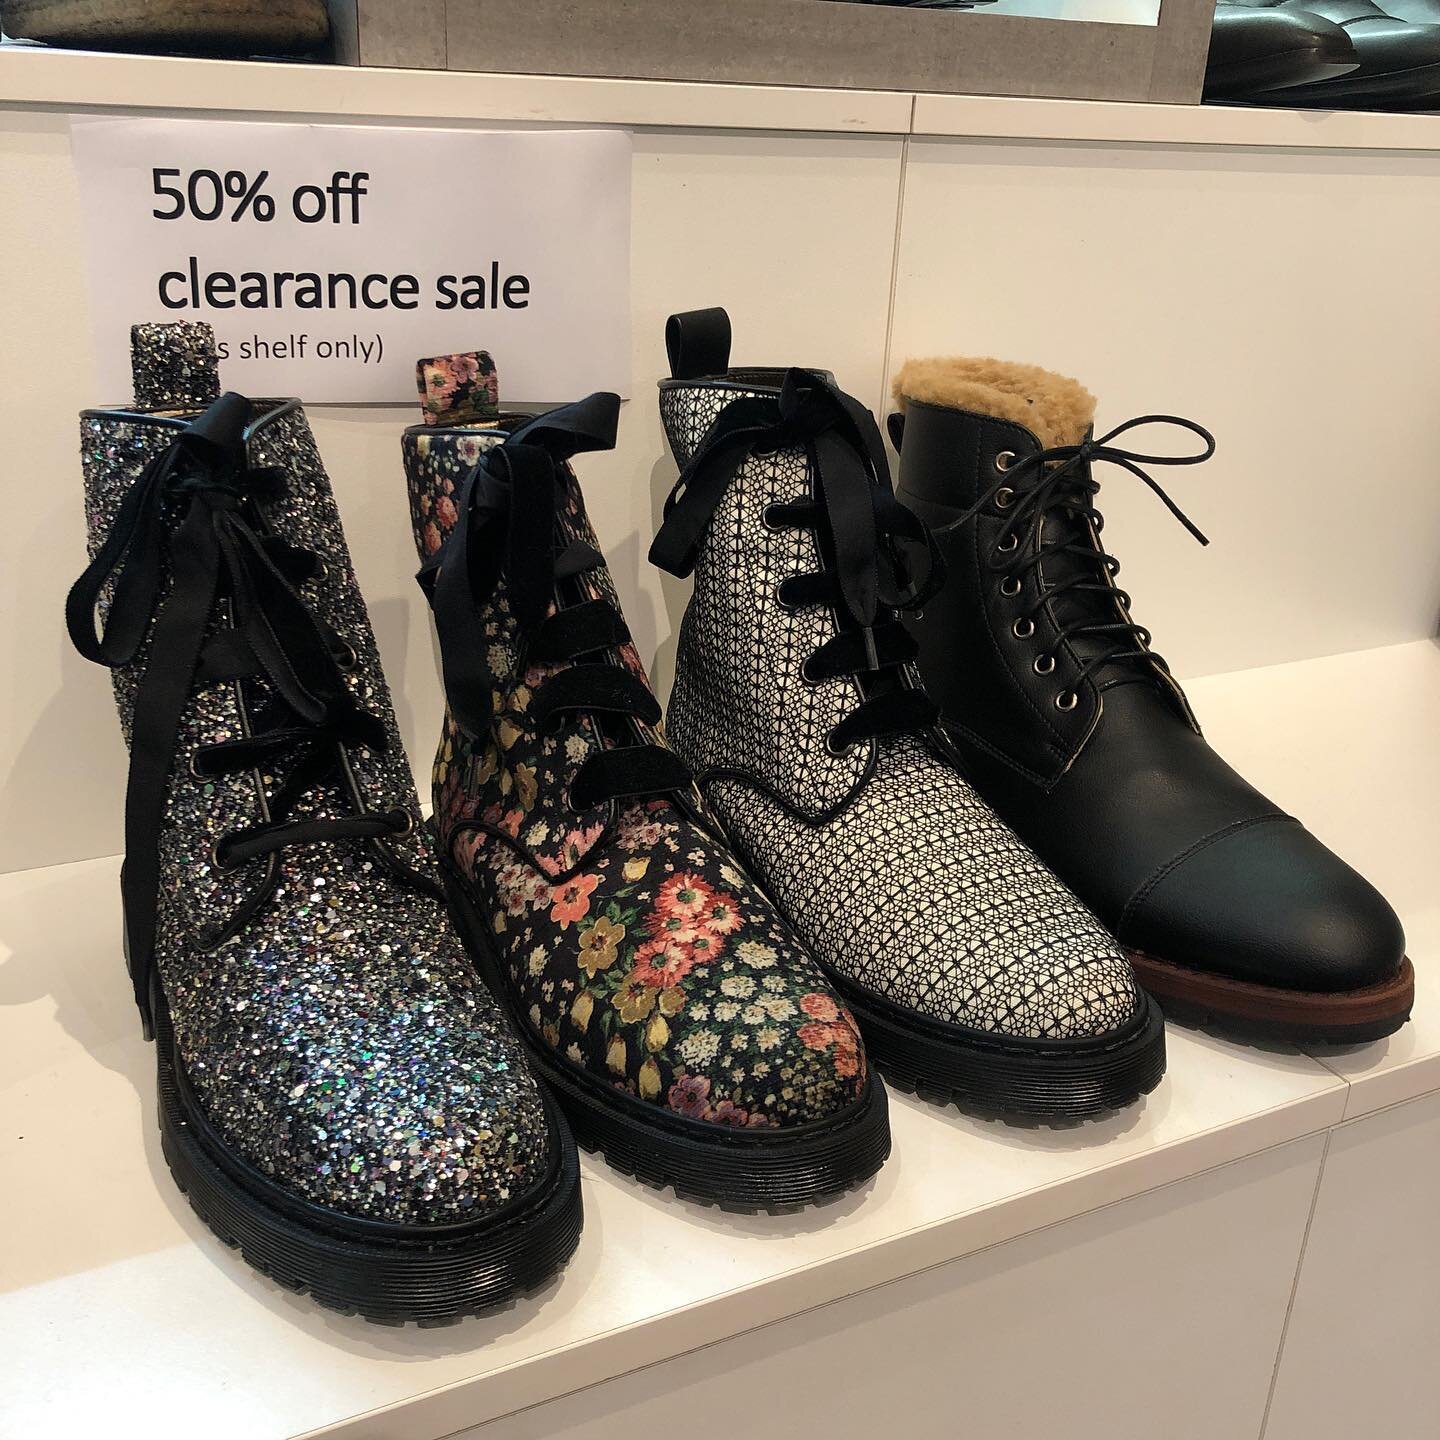 These versions of the Billie boots &amp; the original Crusoe with the faux wool lining are currently 50% off as part of @veganstyleoz&rsquo;s clearance sale!

There&rsquo;s limited stock left as they&rsquo;re older Zette styles, but if you happen to 